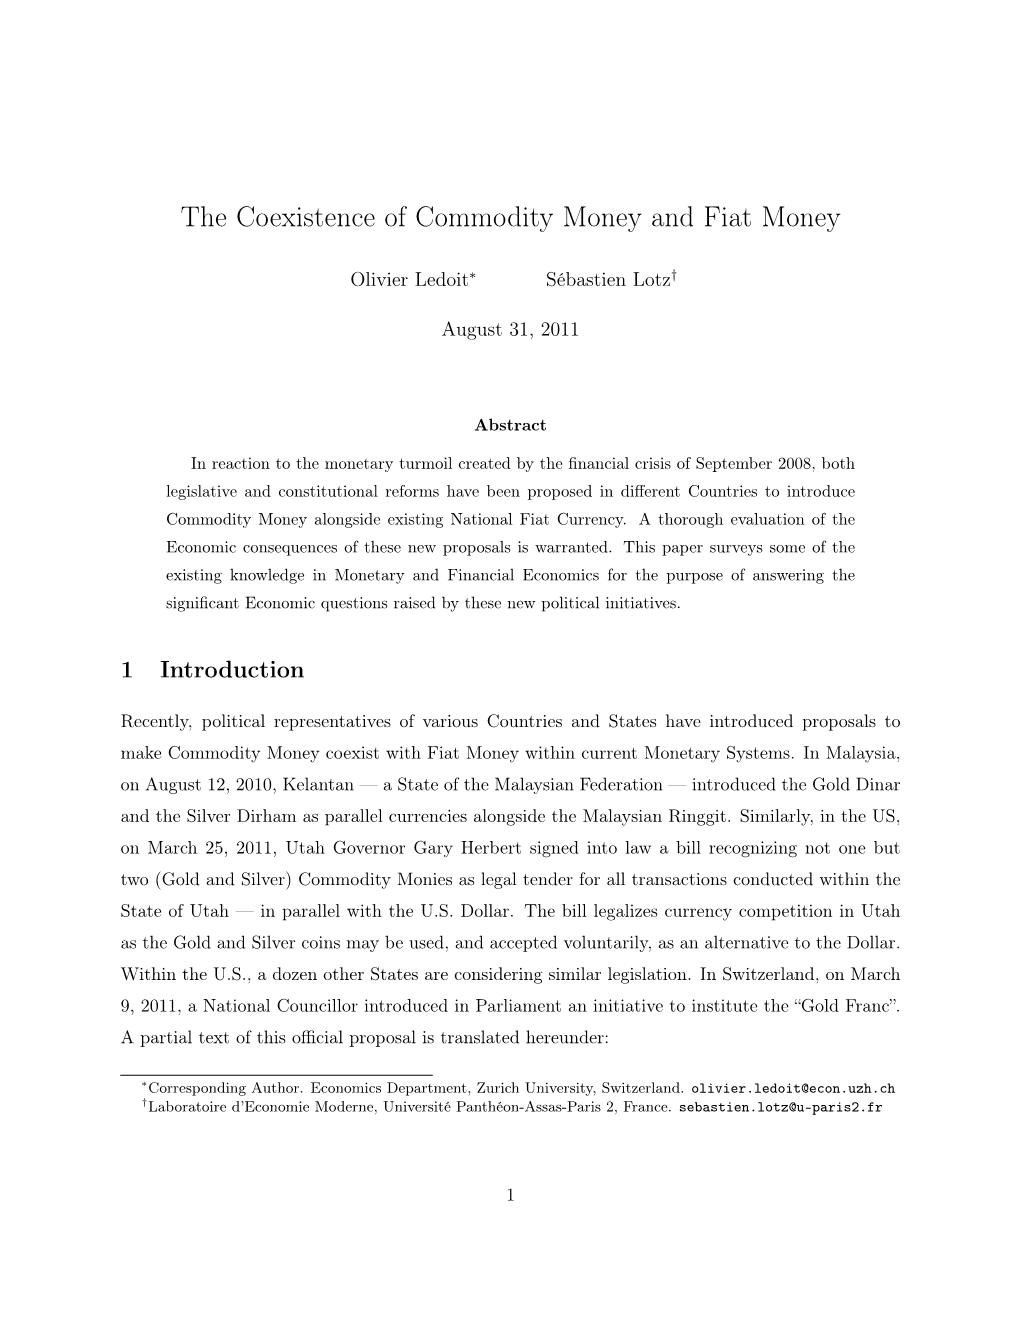 The Coexistence of Commodity Money and Fiat Money